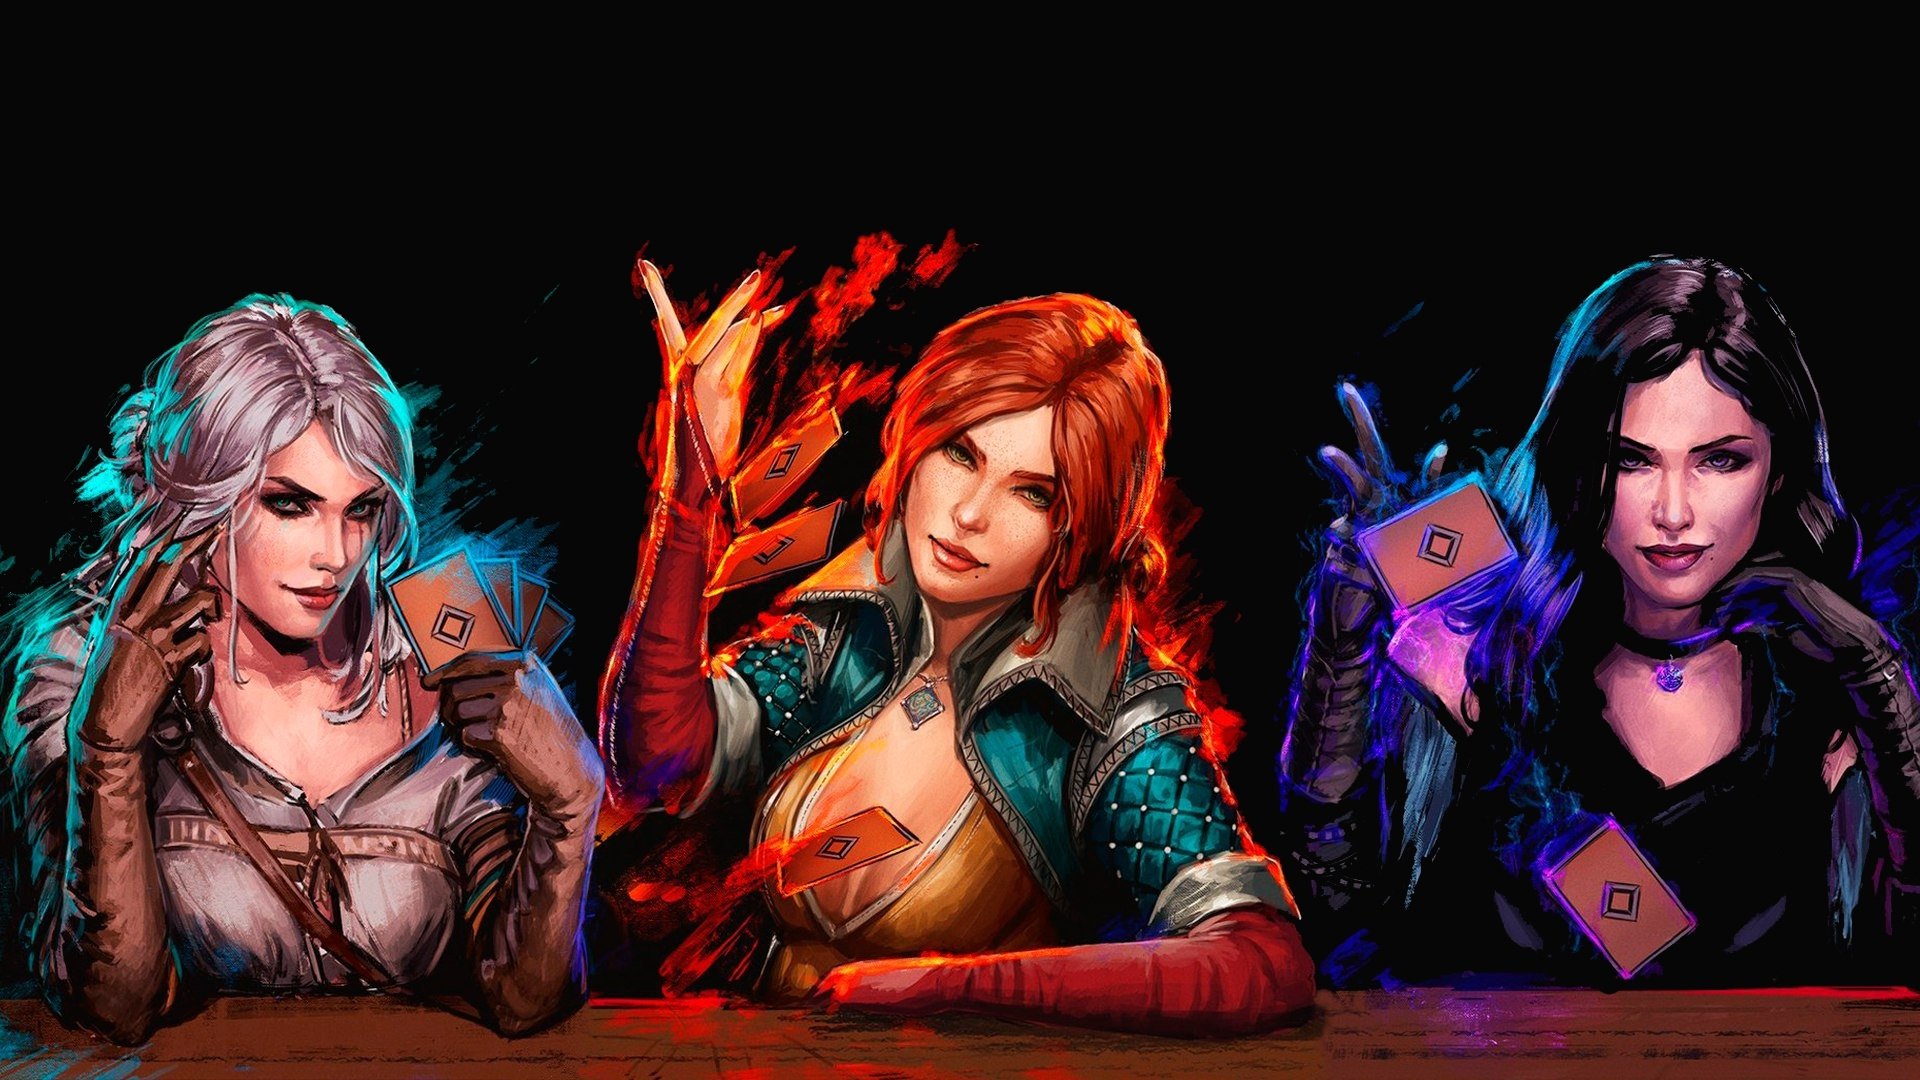 Gwent The Witcher Card Game 2020 Wallpapers